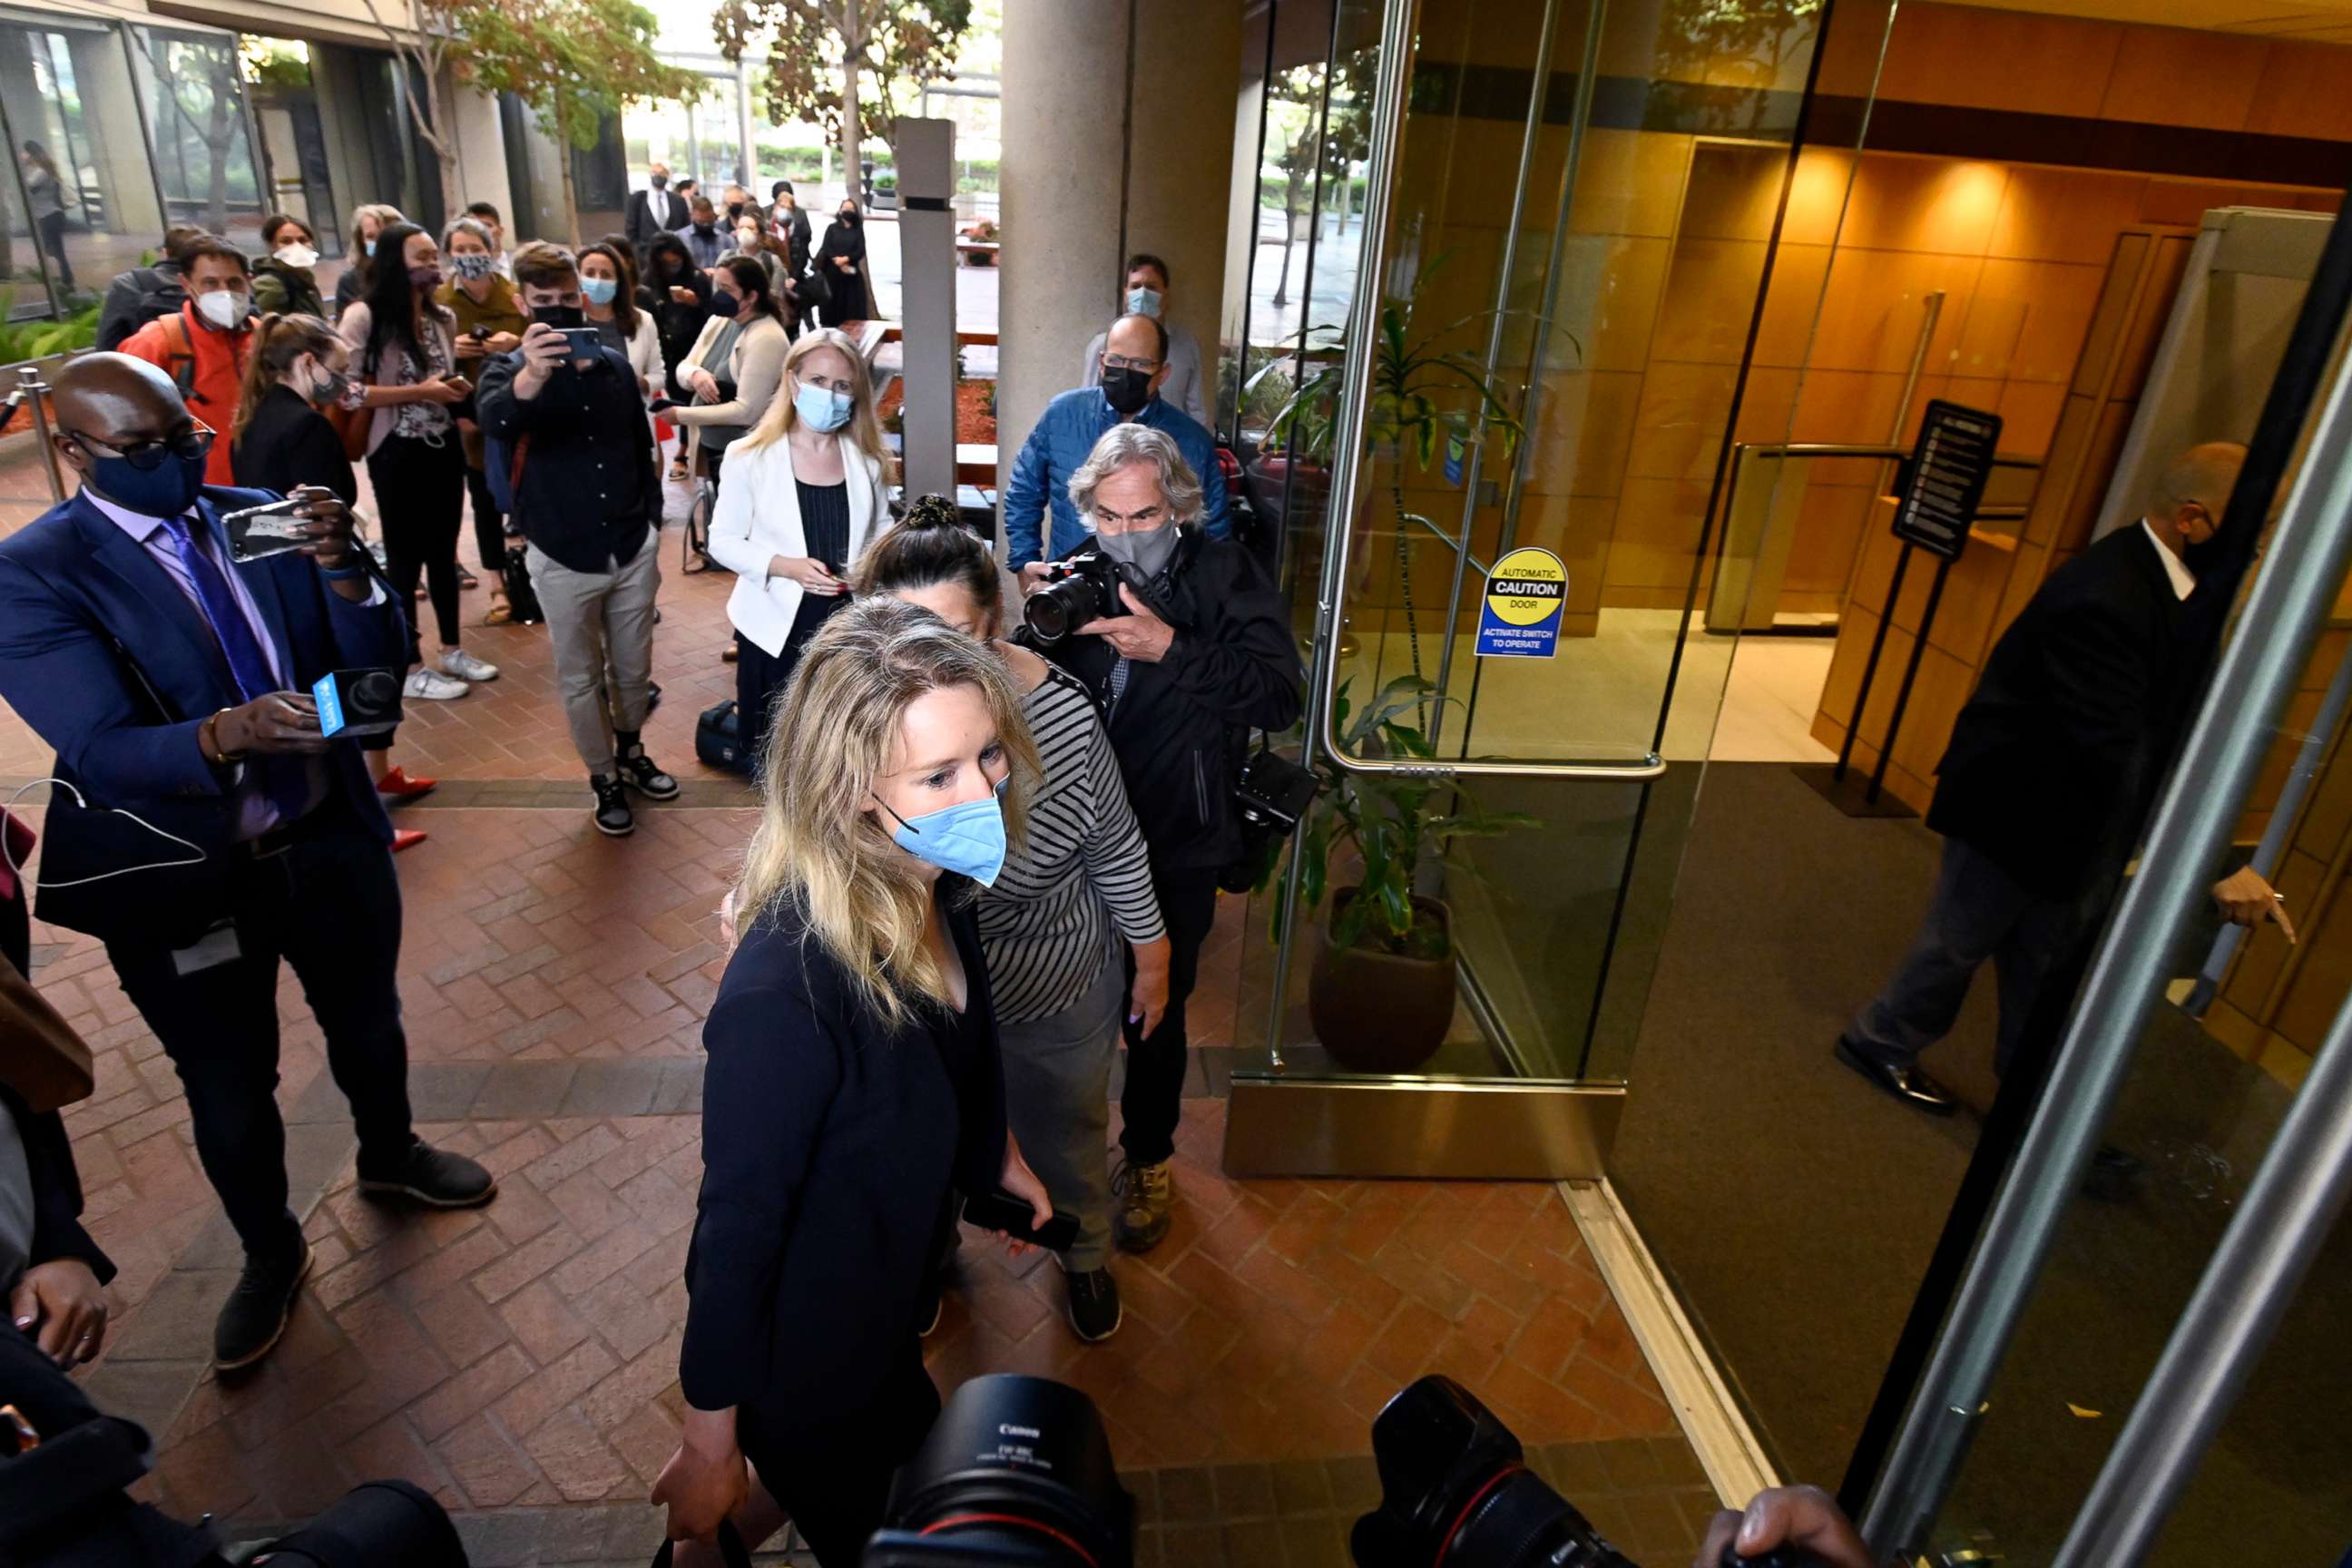 PHOTO: Elizabeth Holmes, bottom center, founder and CEO of Theranos, arrives at the federal courthouse for jury selection in her trial, Aug. 31, 2021, in San Jose, Calif.